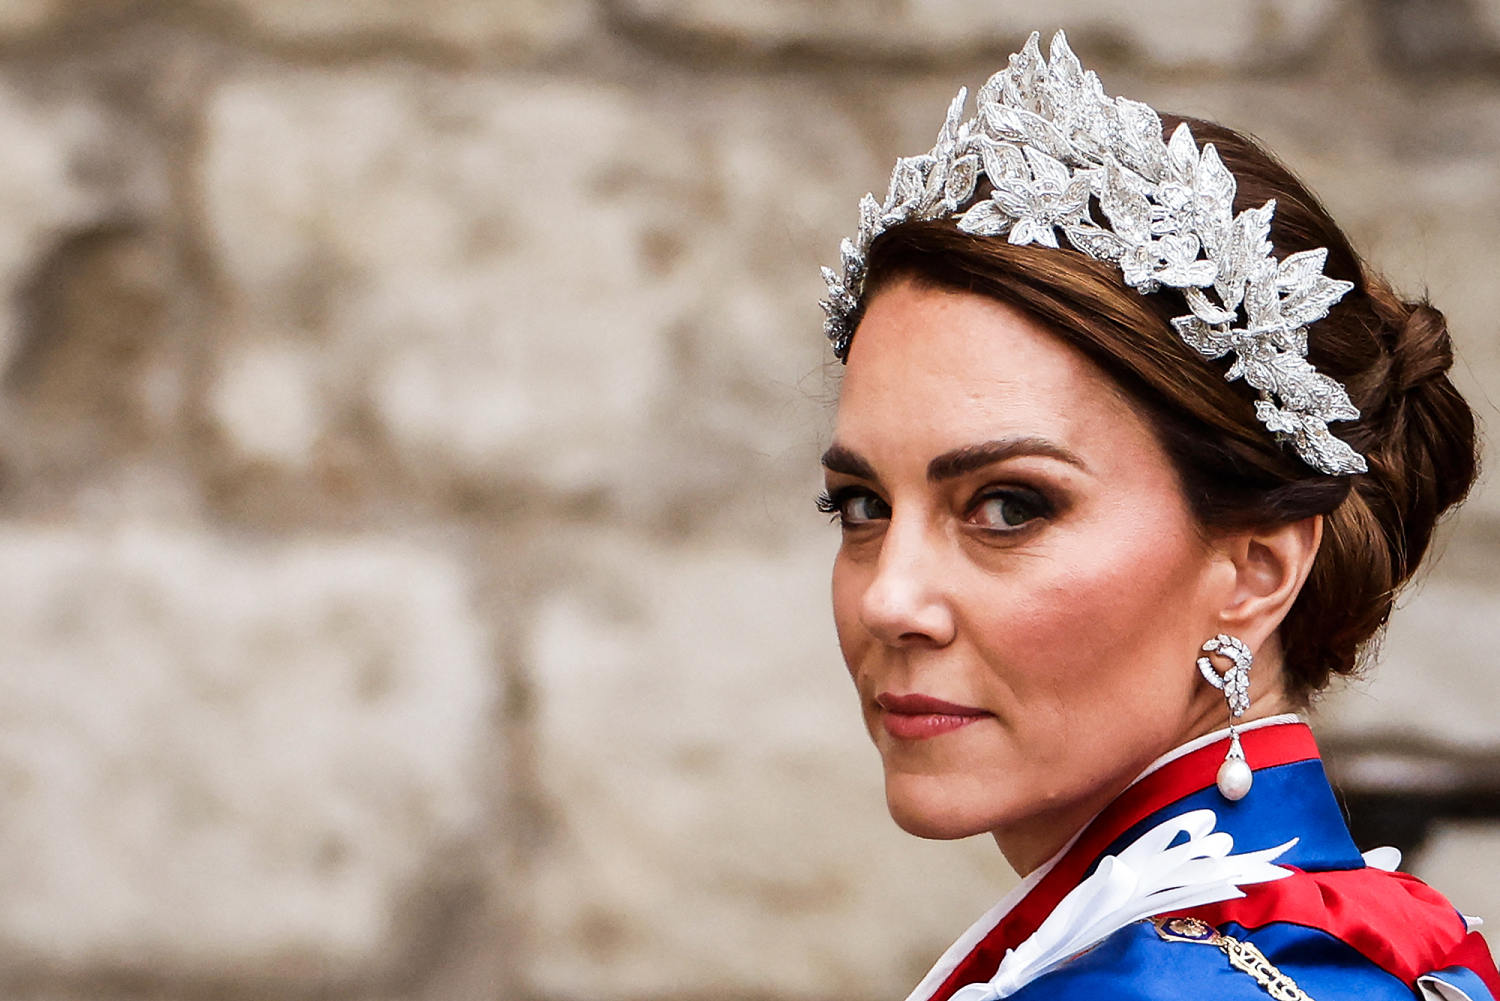 Kate Middleton has a new royal title that marks a first for the royal family